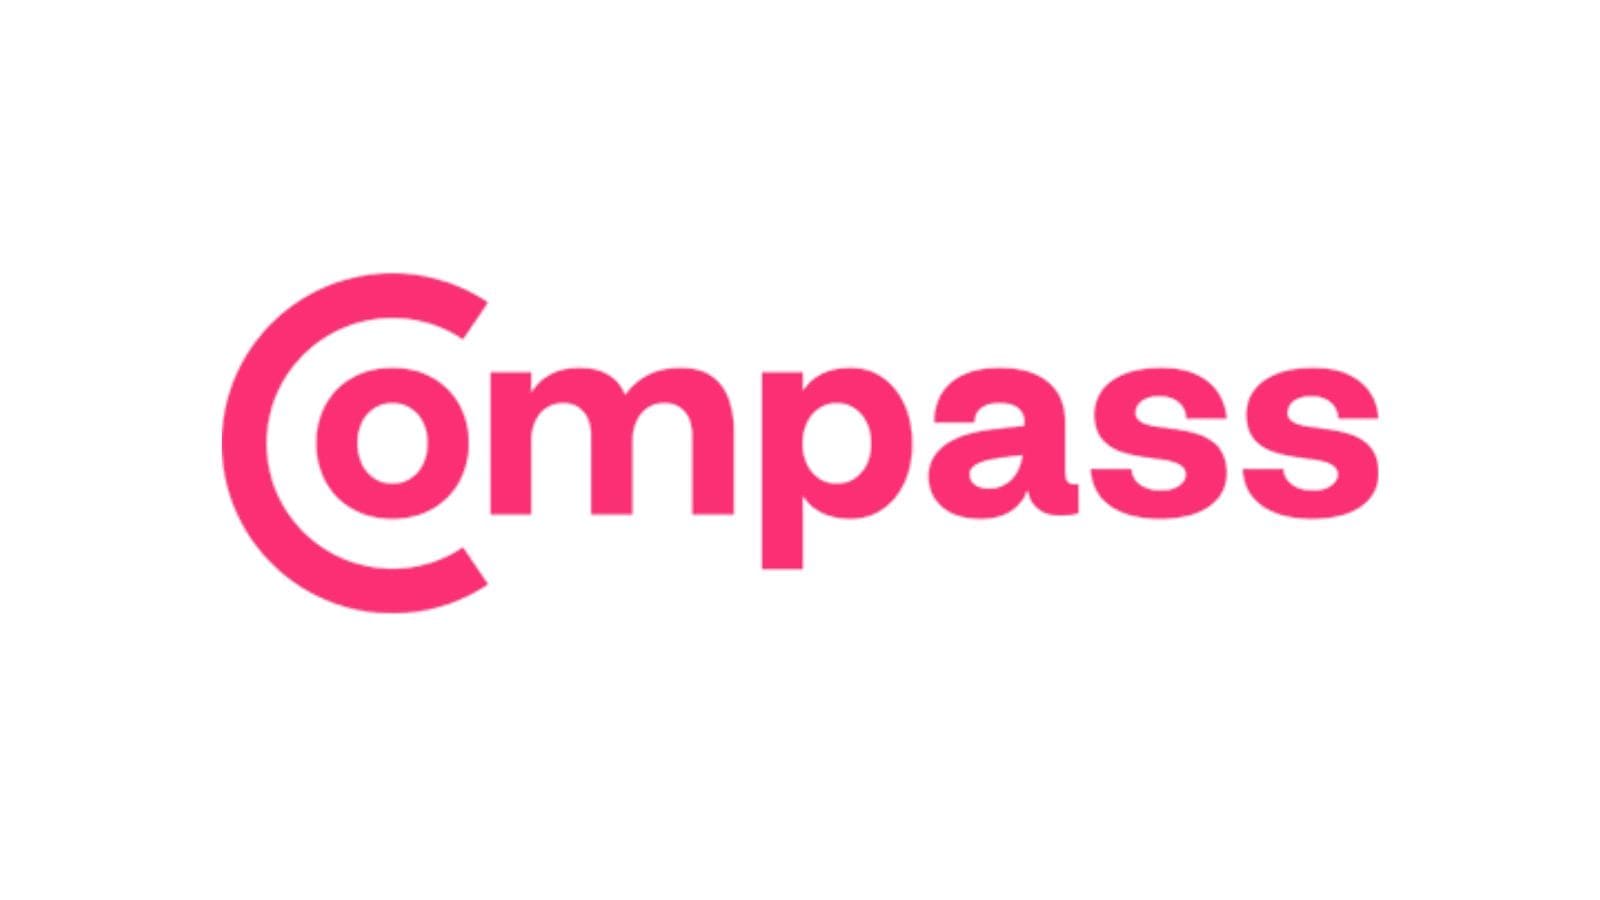 The work Compass in pink writing. The "C" contains the letter "O".